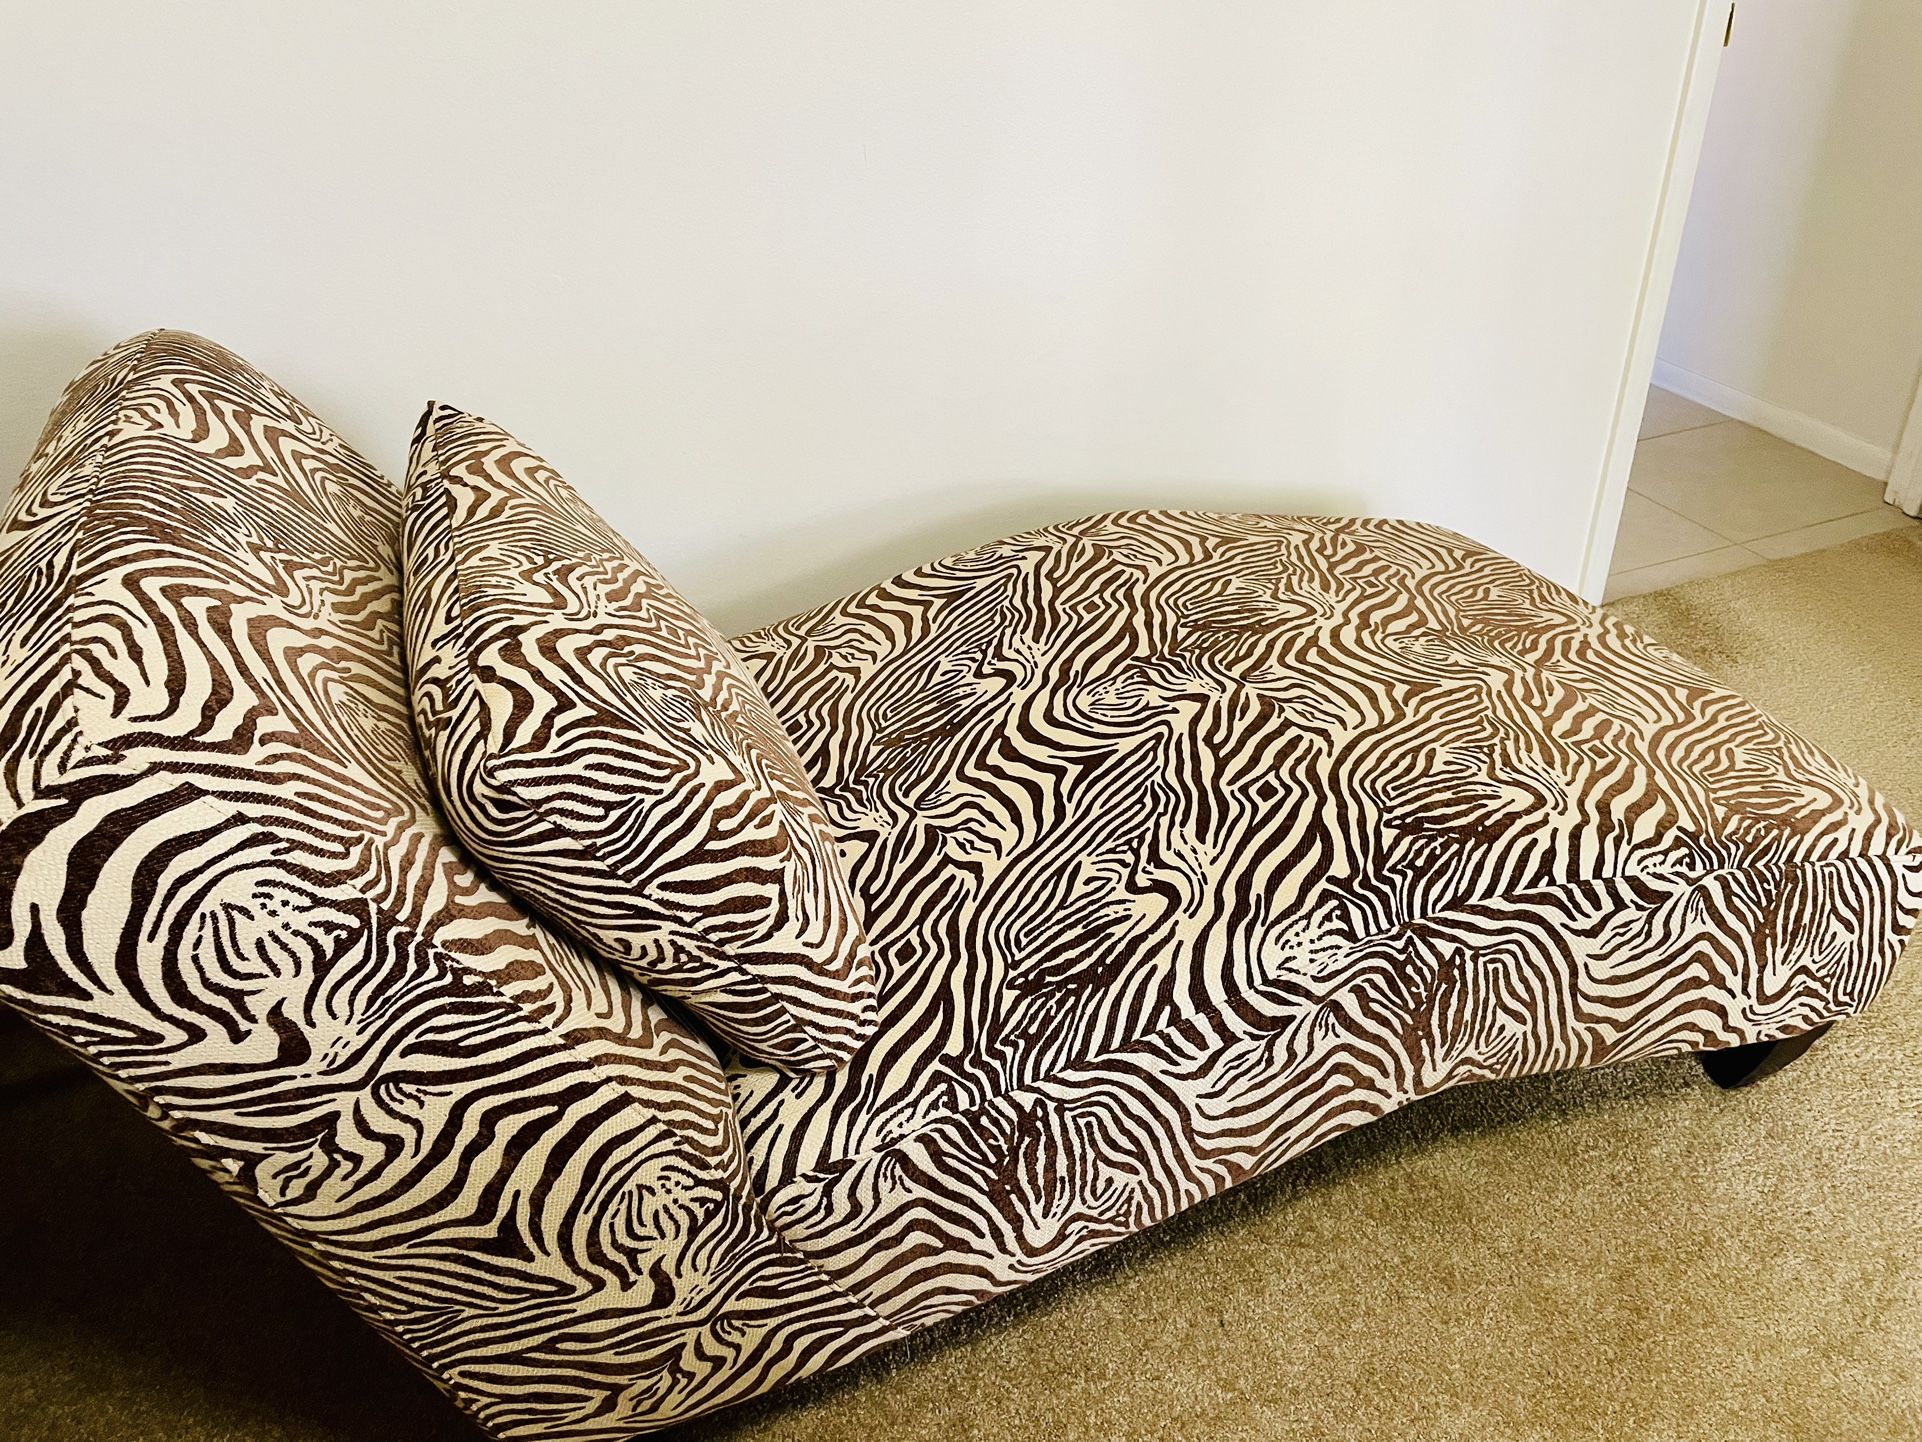 Zebra Print Chaise Lounge With Pillow